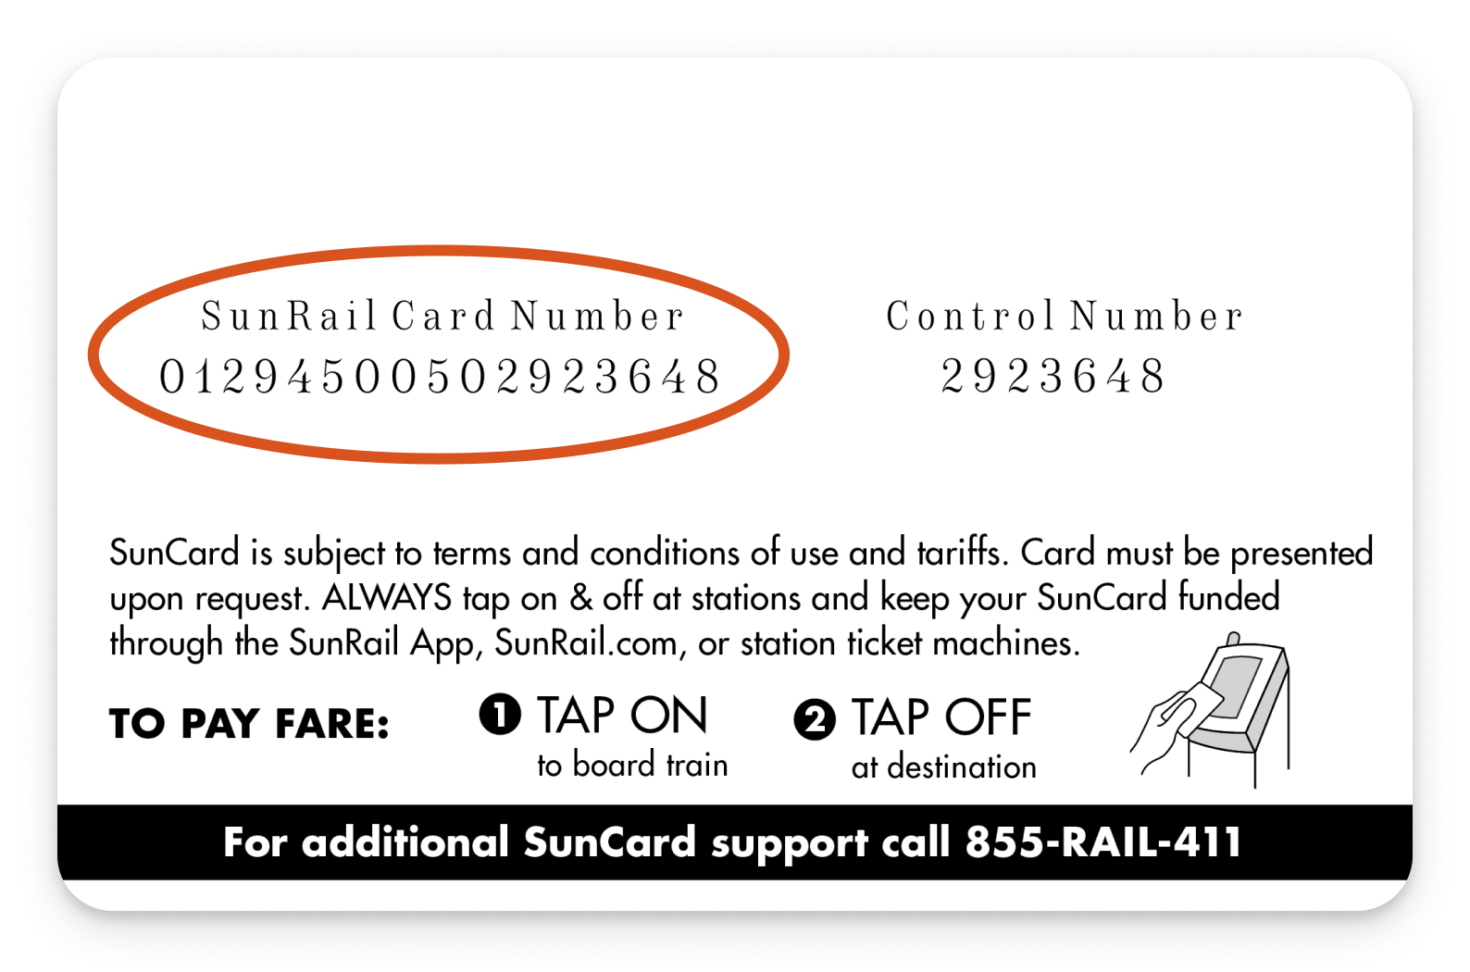 Back of SunCard indicating the SunRail Card Number